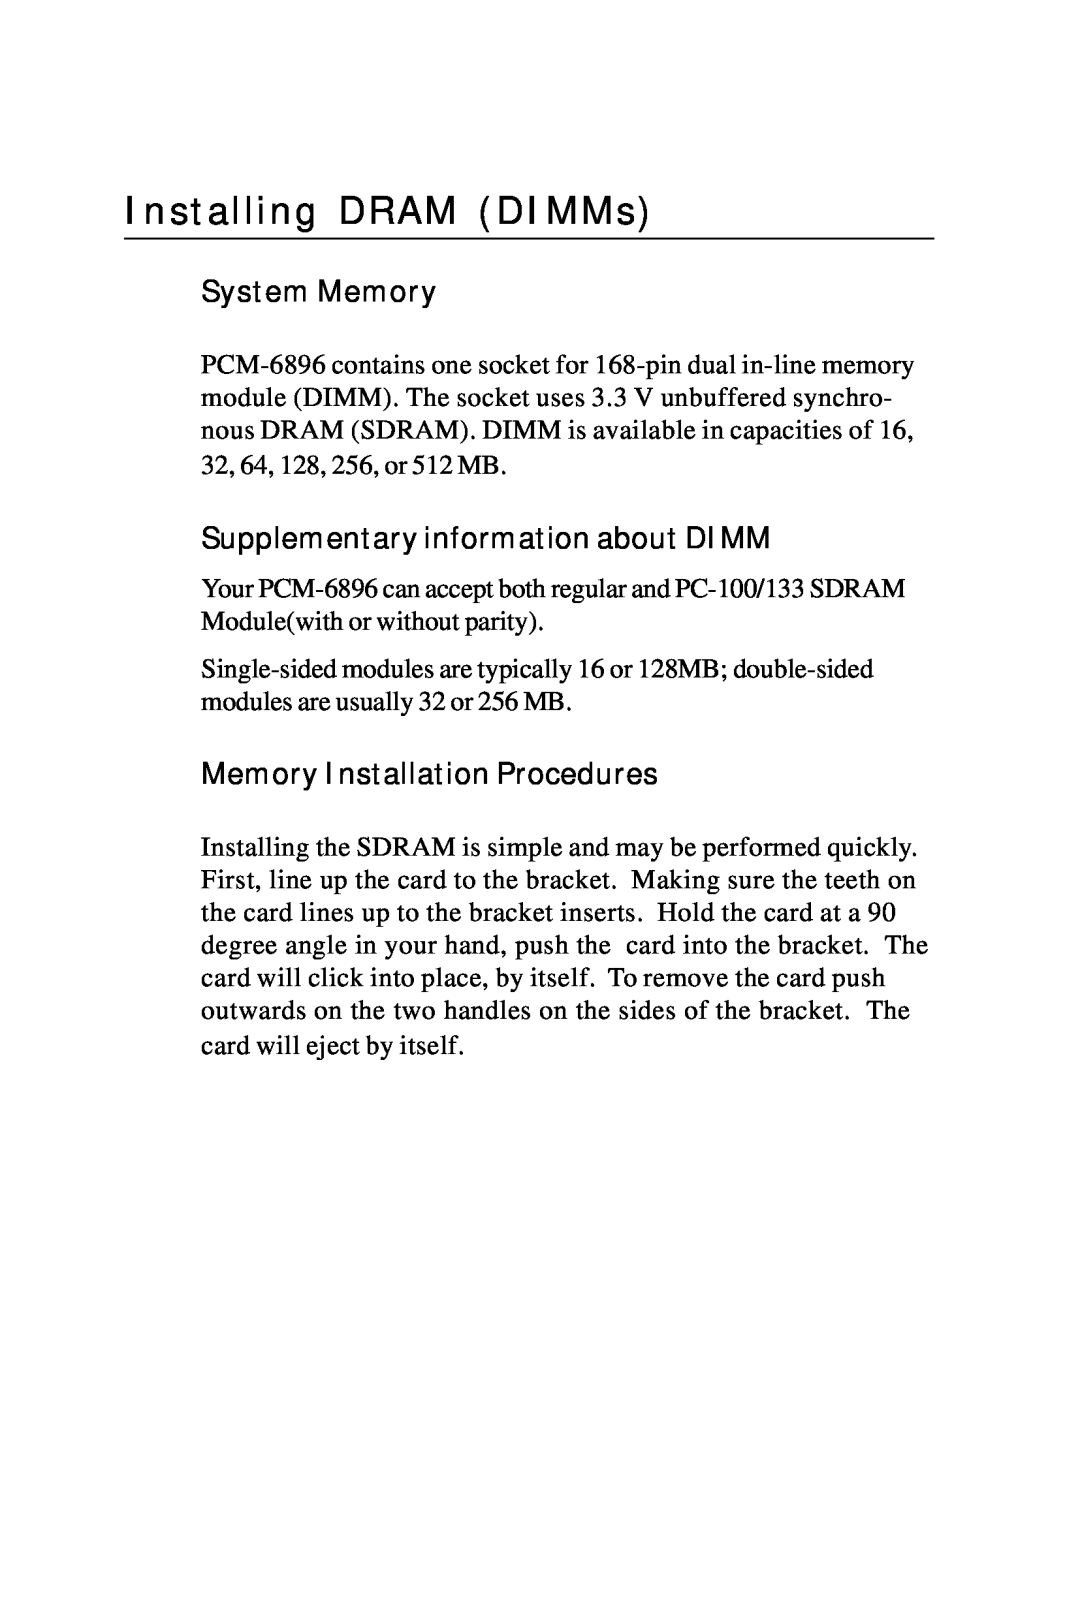 Intel PCM-6896 Installing DRAM DIMMs, System Memory, Supplementary information about DIMM, Memory Installation Procedures 